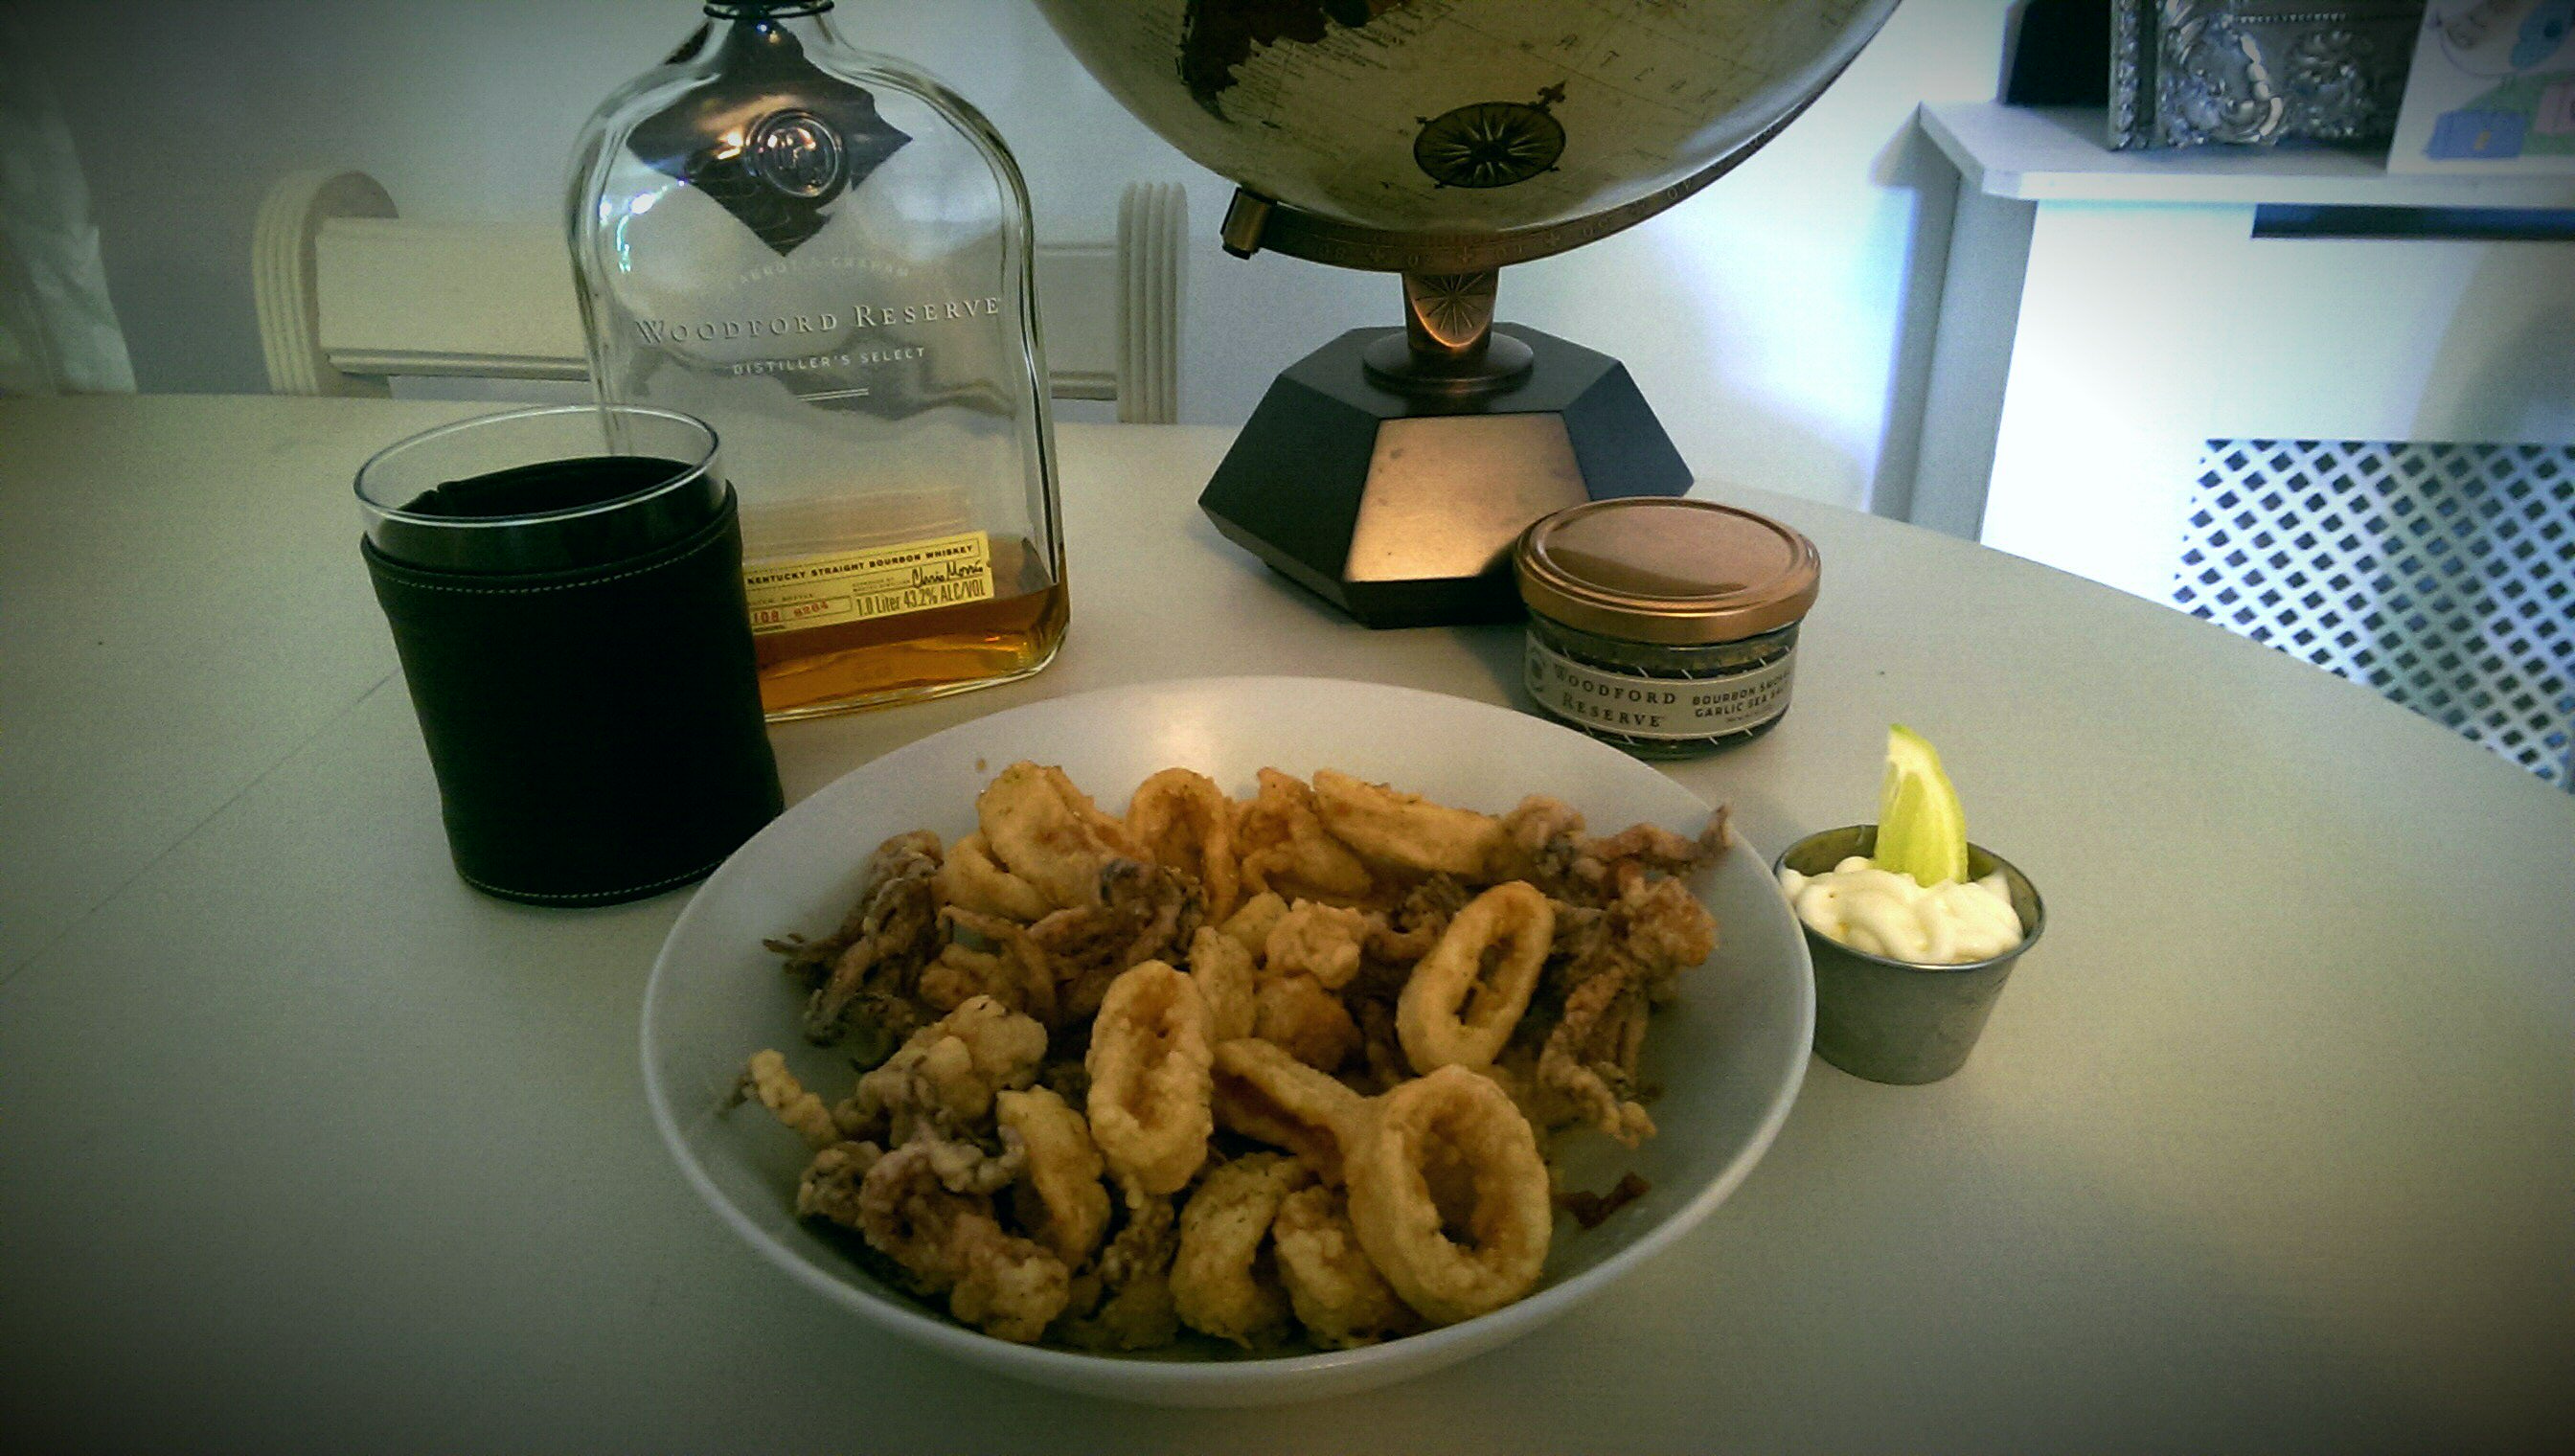 This one time, at band camp, I made bourbon-infused calamari.  You know it was good.